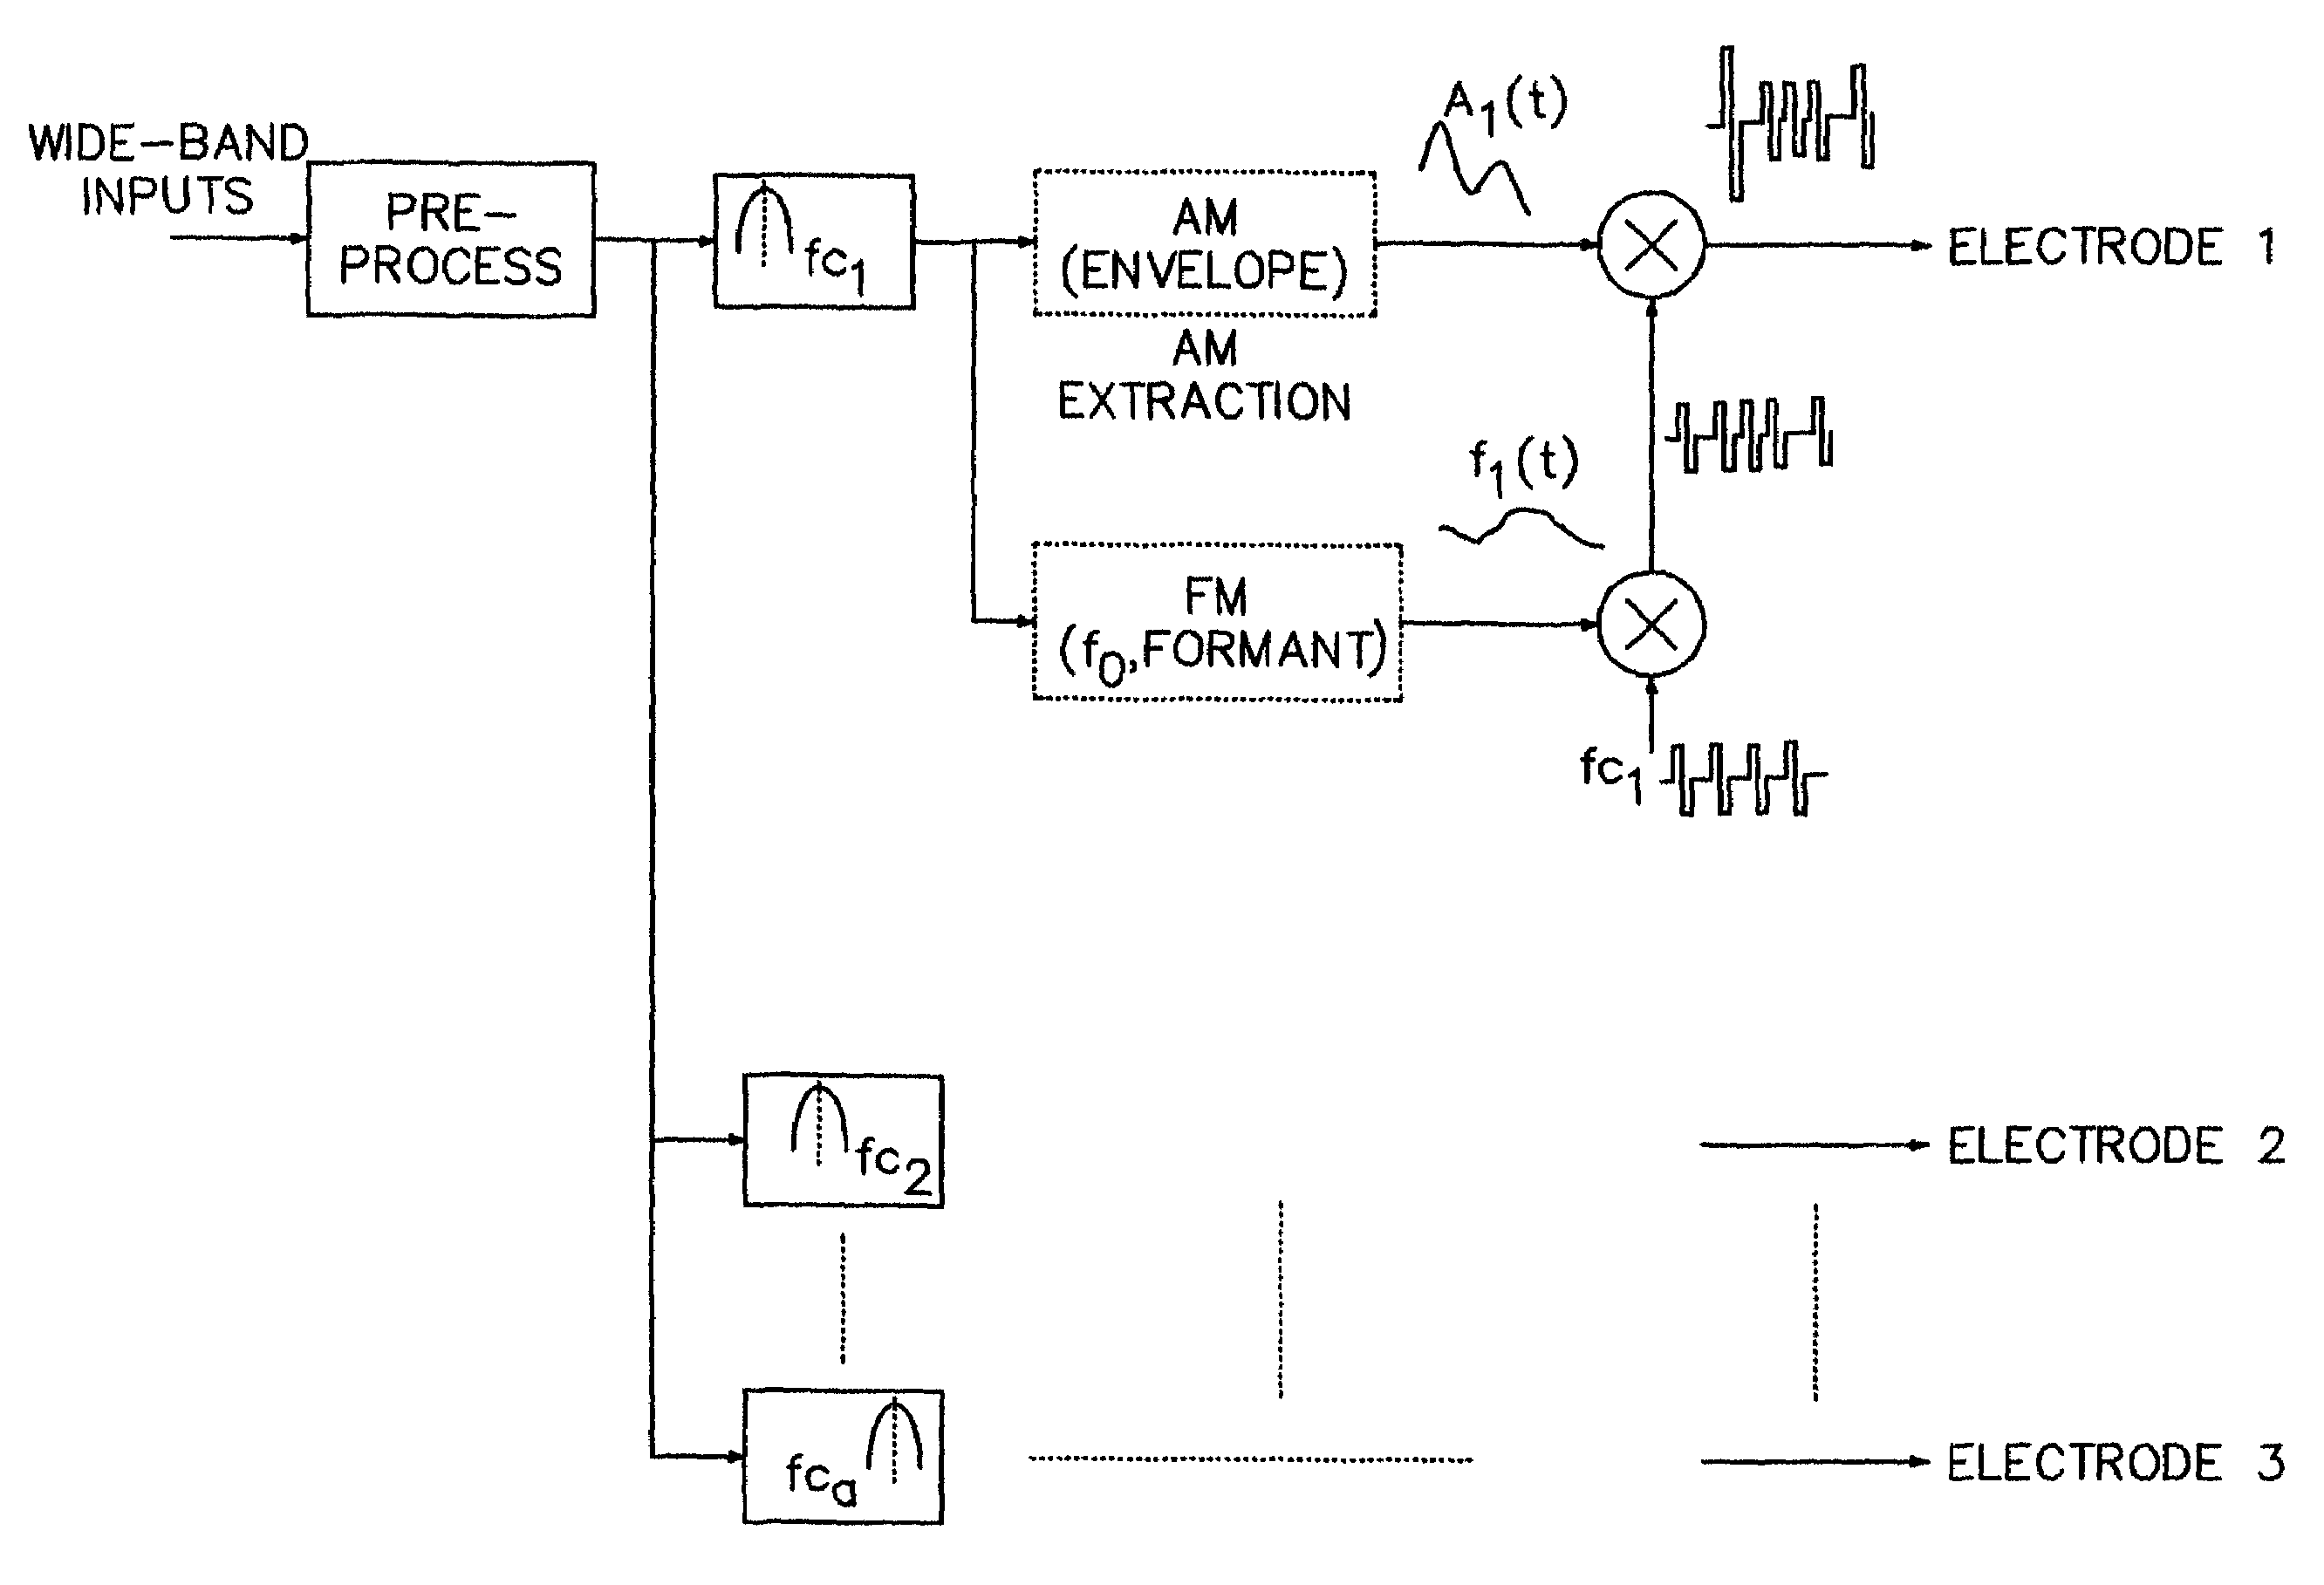 Cochlear implants and apparatus/methods for improving audio signals by use of frequency-amplitude-modulation-encoding (FAME) strategies